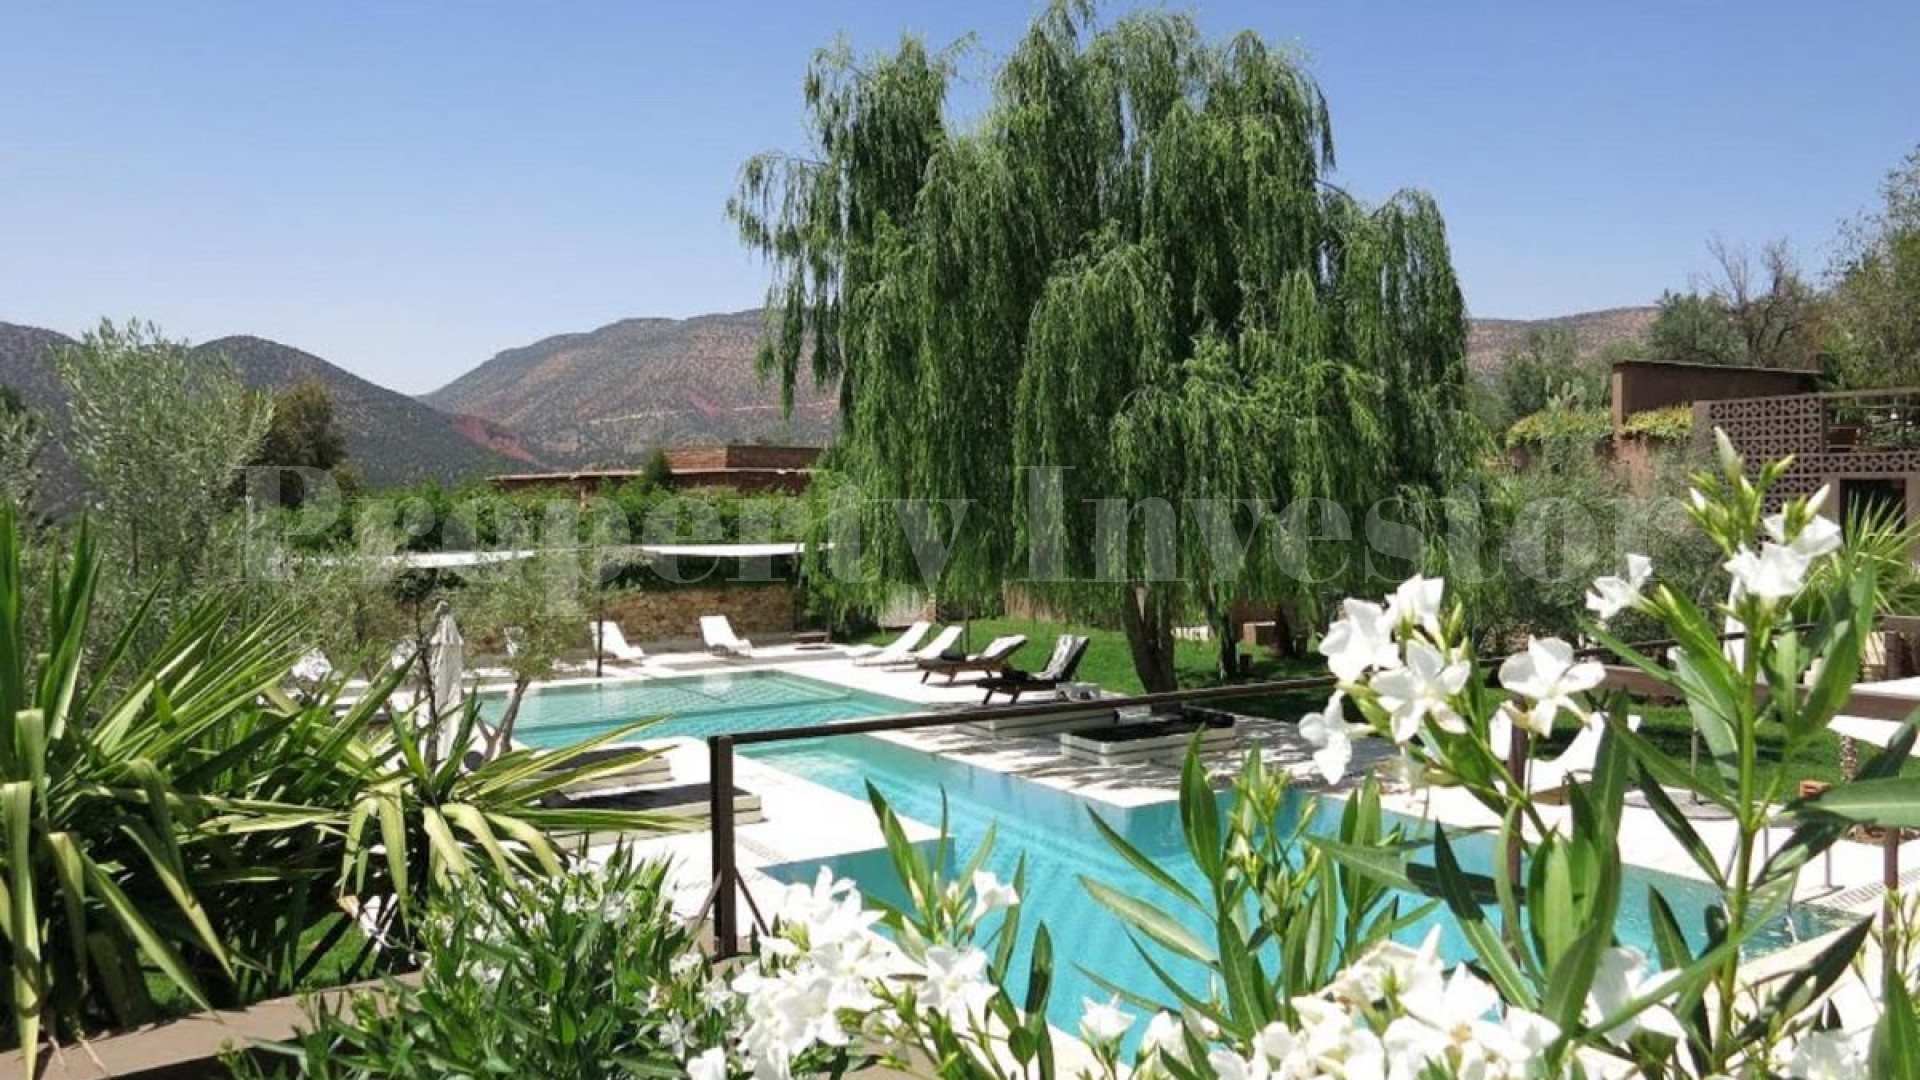 Upscale 10 Suite Boutique Ecolodge for Sale at the Foot of the Atlas Mountains, Morocco